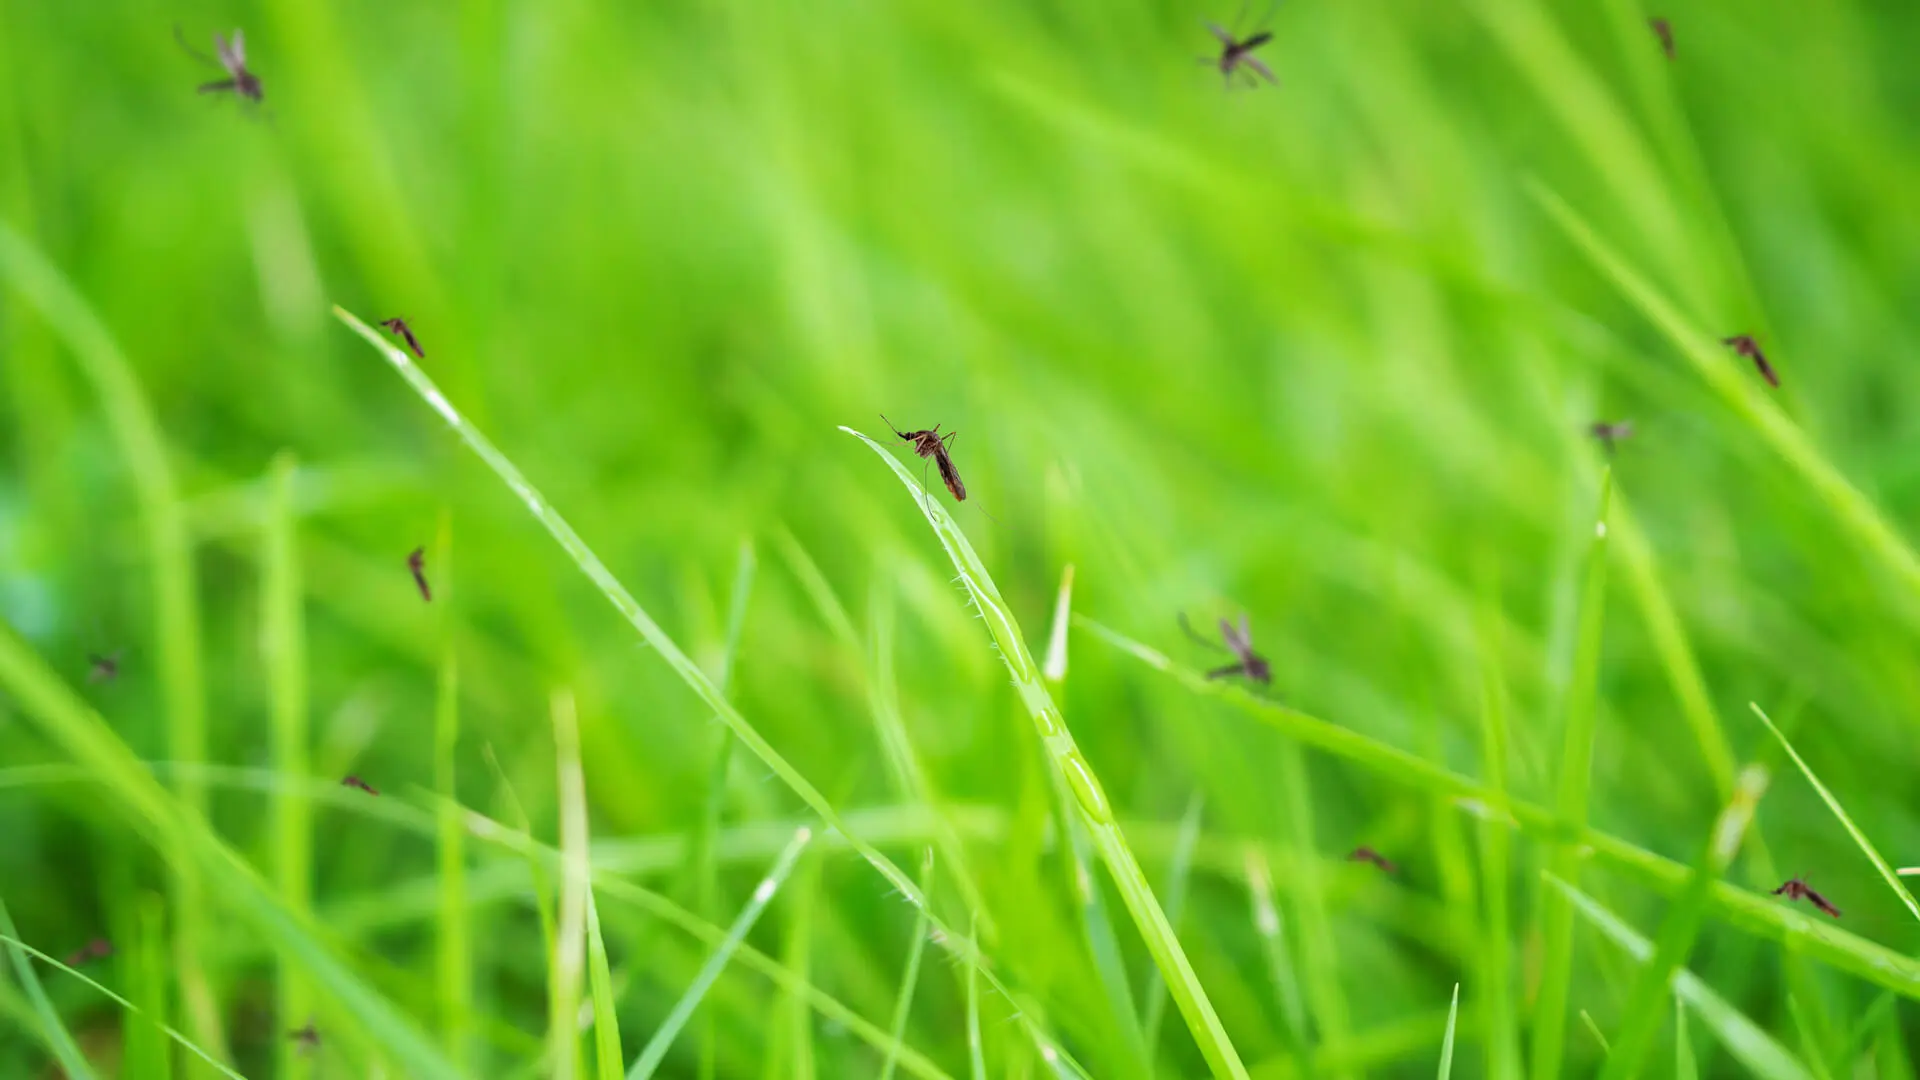 Don’t Breed your own Mosquitoes! Pest Control McKinney TX Pros’ Advice